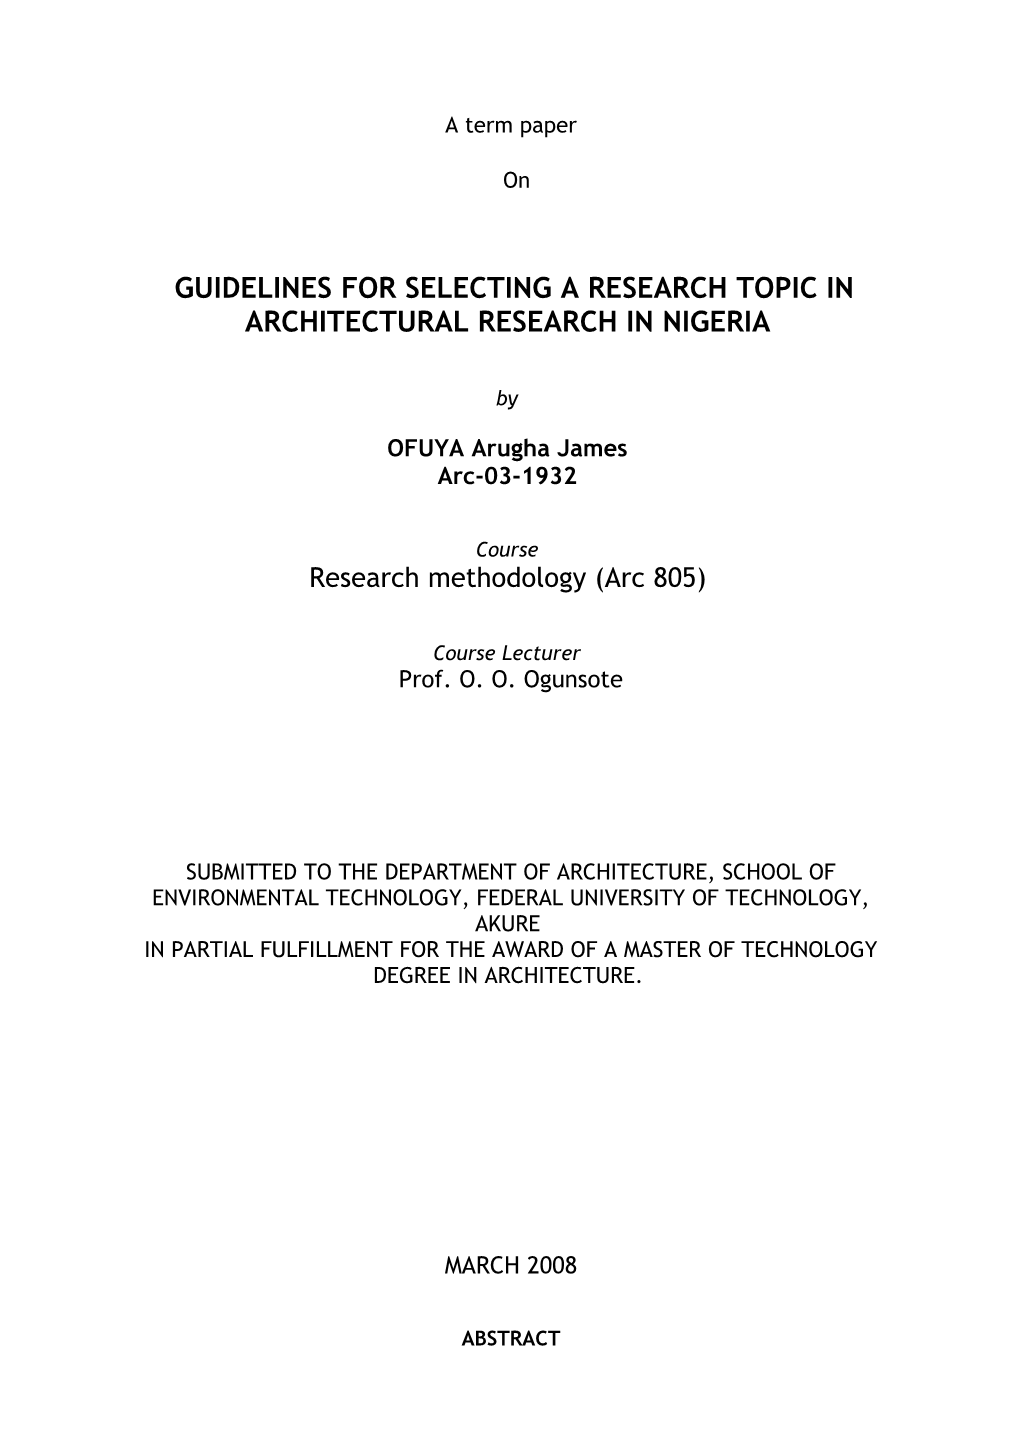 Guidelines for Selecting a Research Topic in Architectural Research in Nigeria